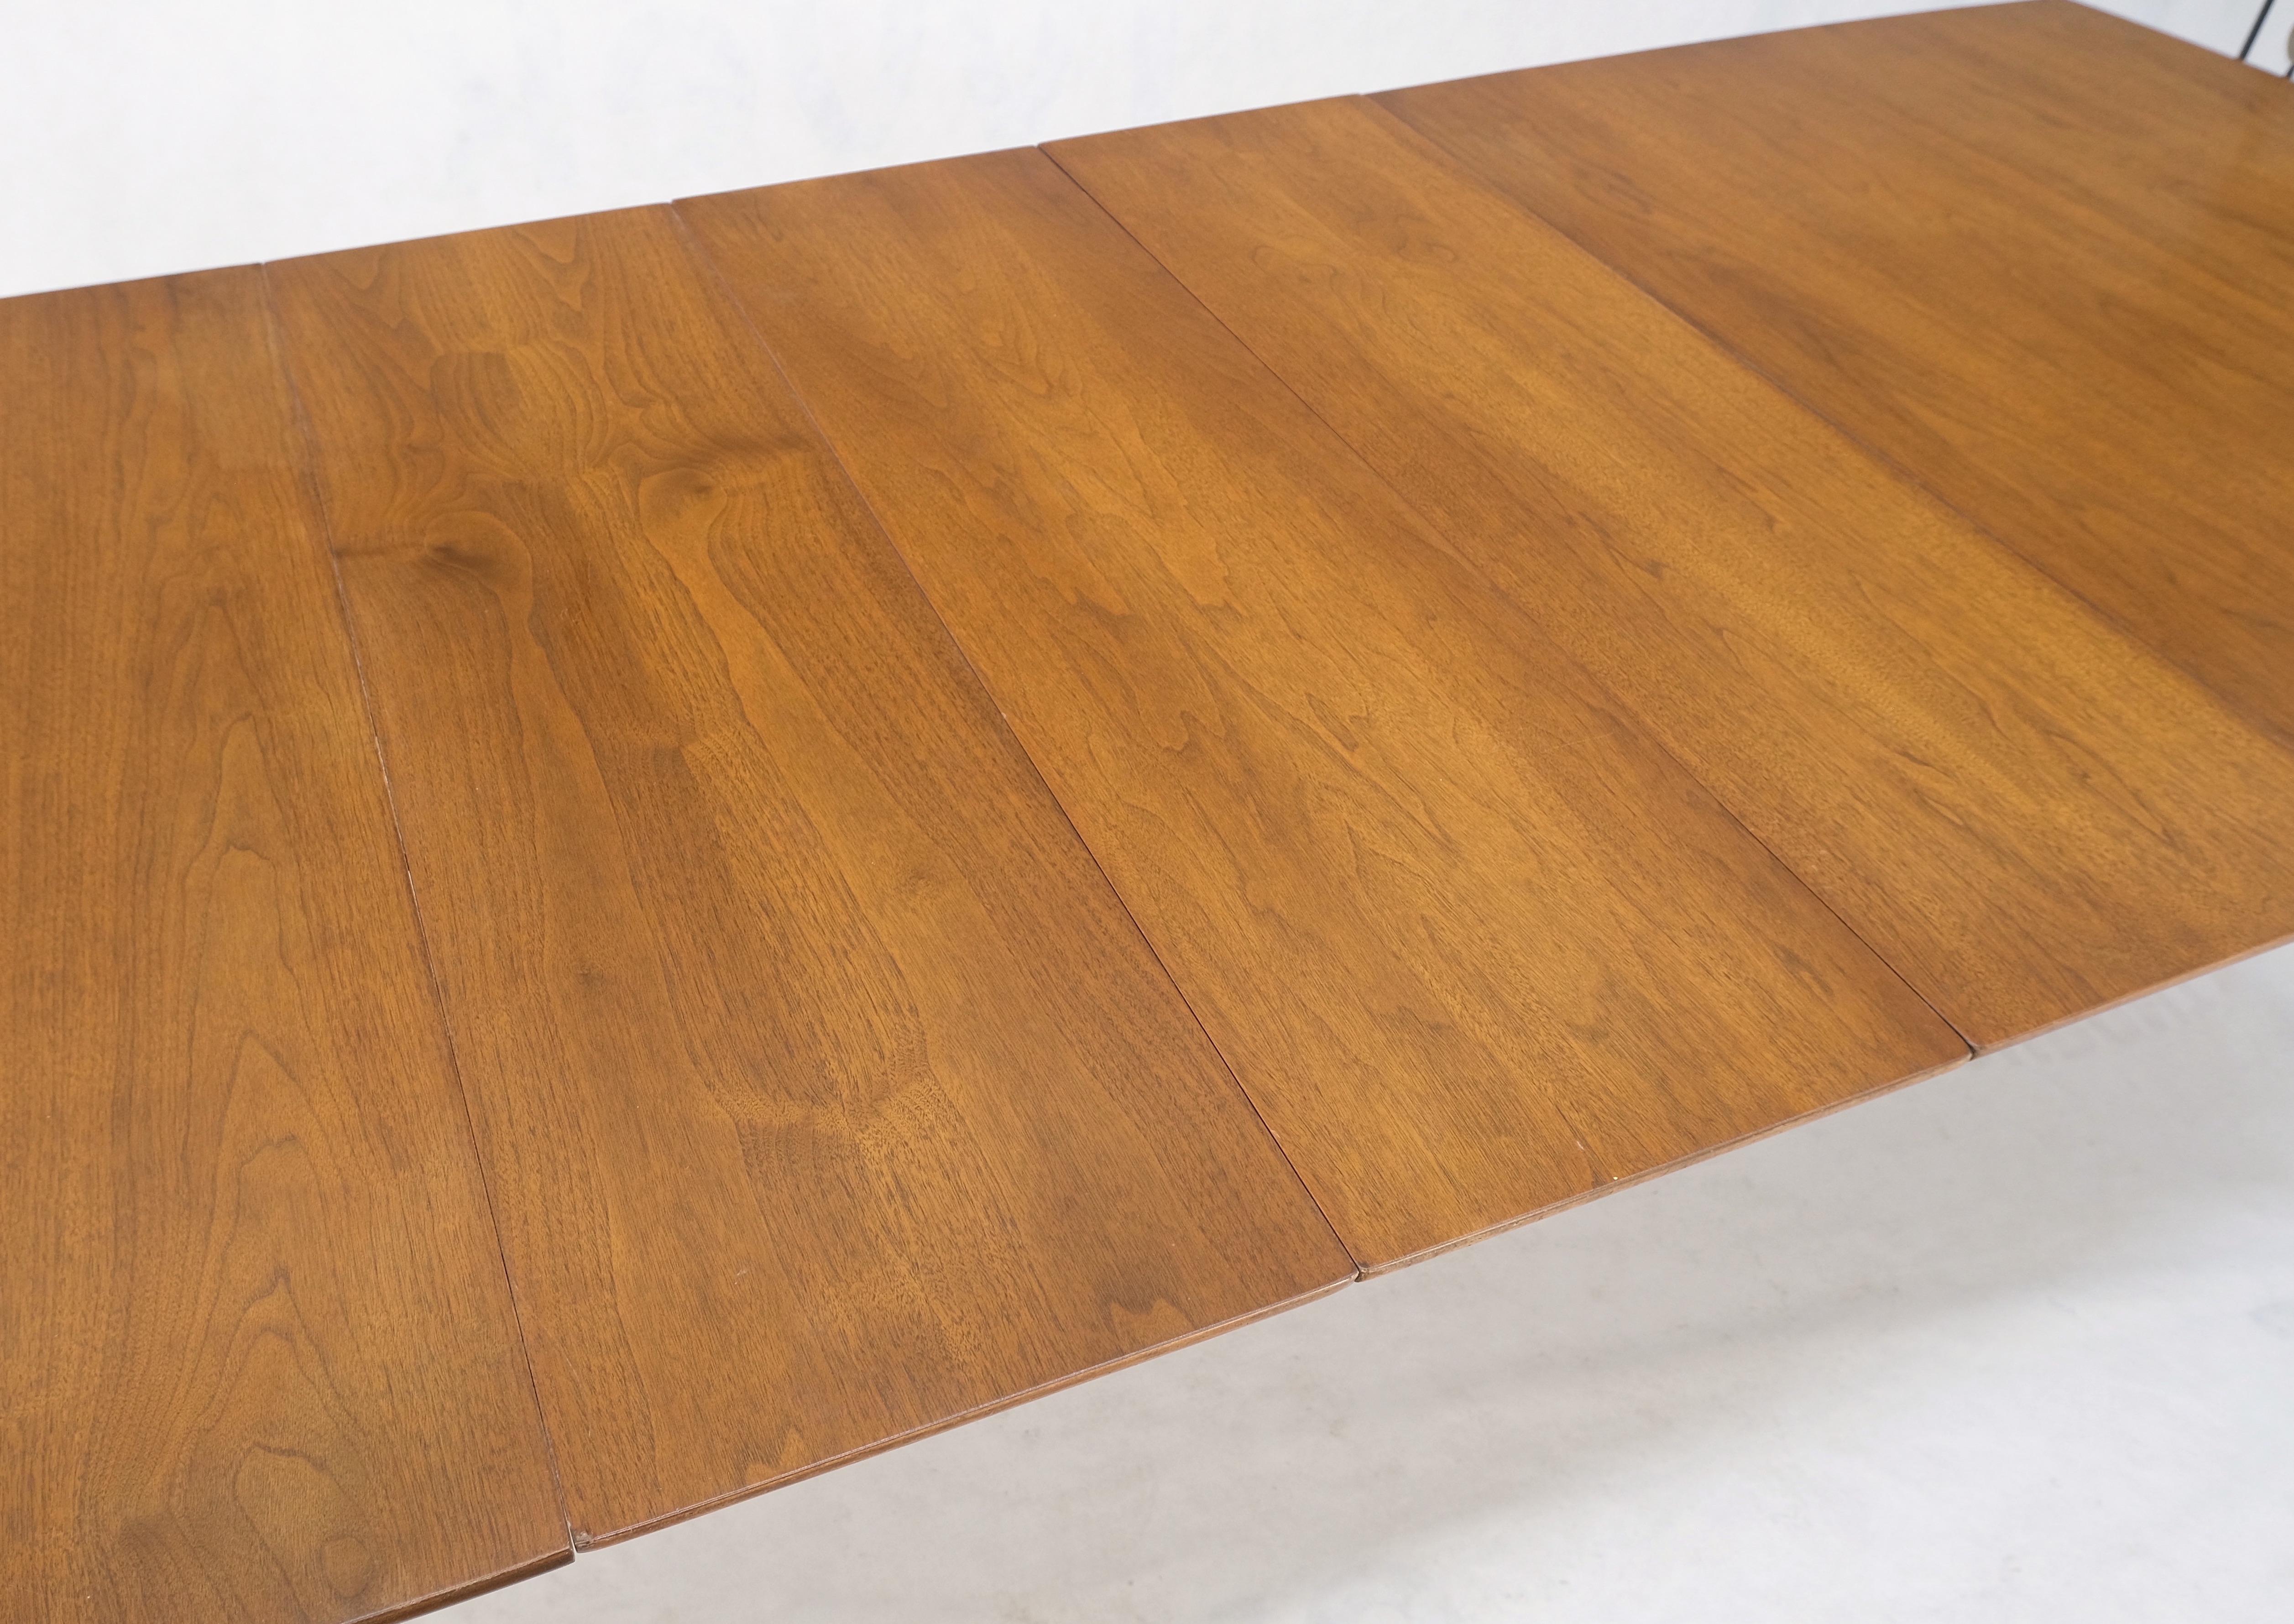 Light Walnut American Mid-Century Modern Boat Shape Dining Table 3 Leaves Mint! For Sale 4